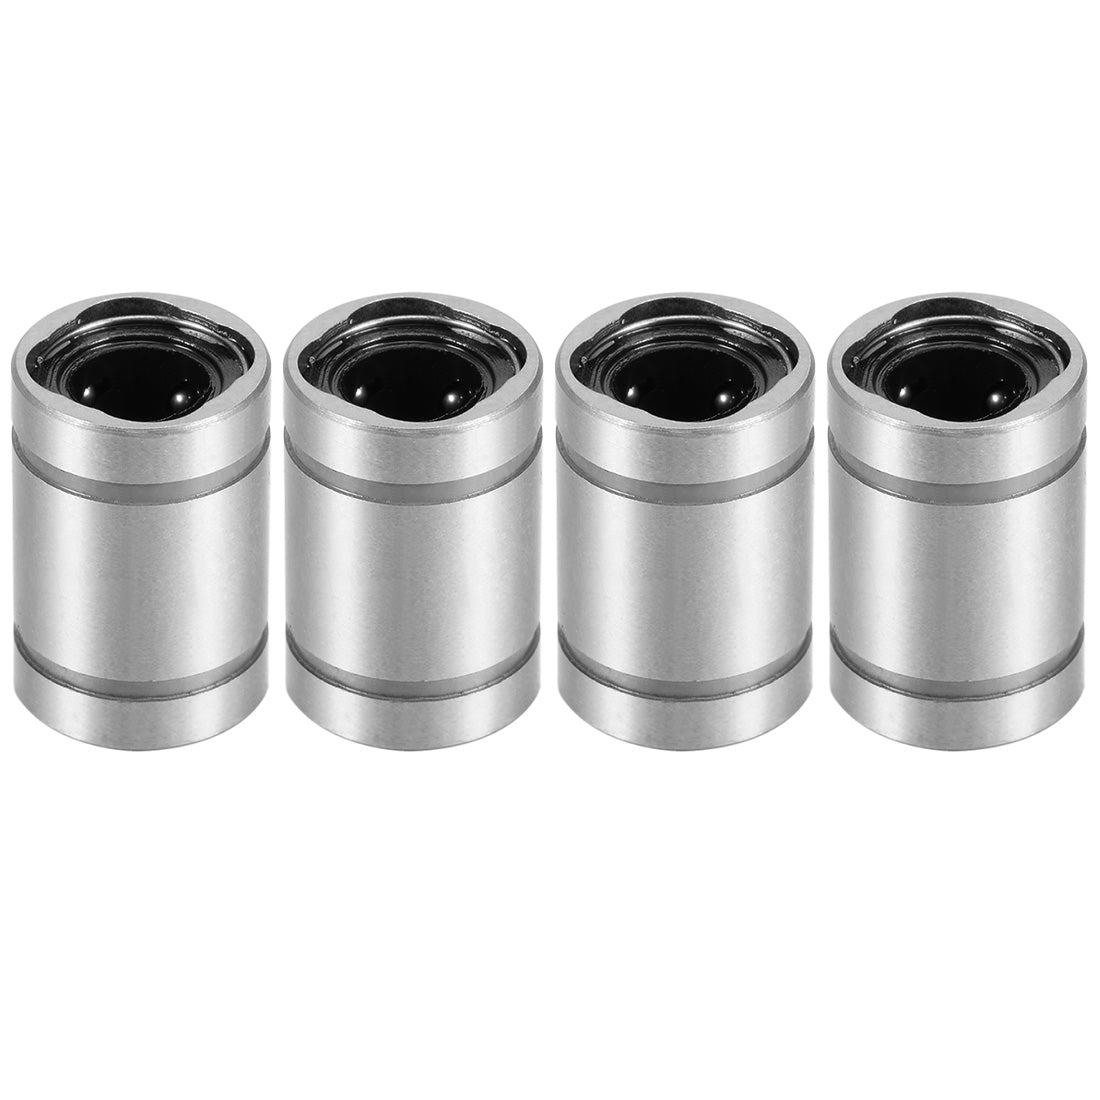 uxcell Uxcell LM5UU Linear Ball Bearings 5mm Bore 10mm OD 15mm Length for CNC 3D Printer 4pcs